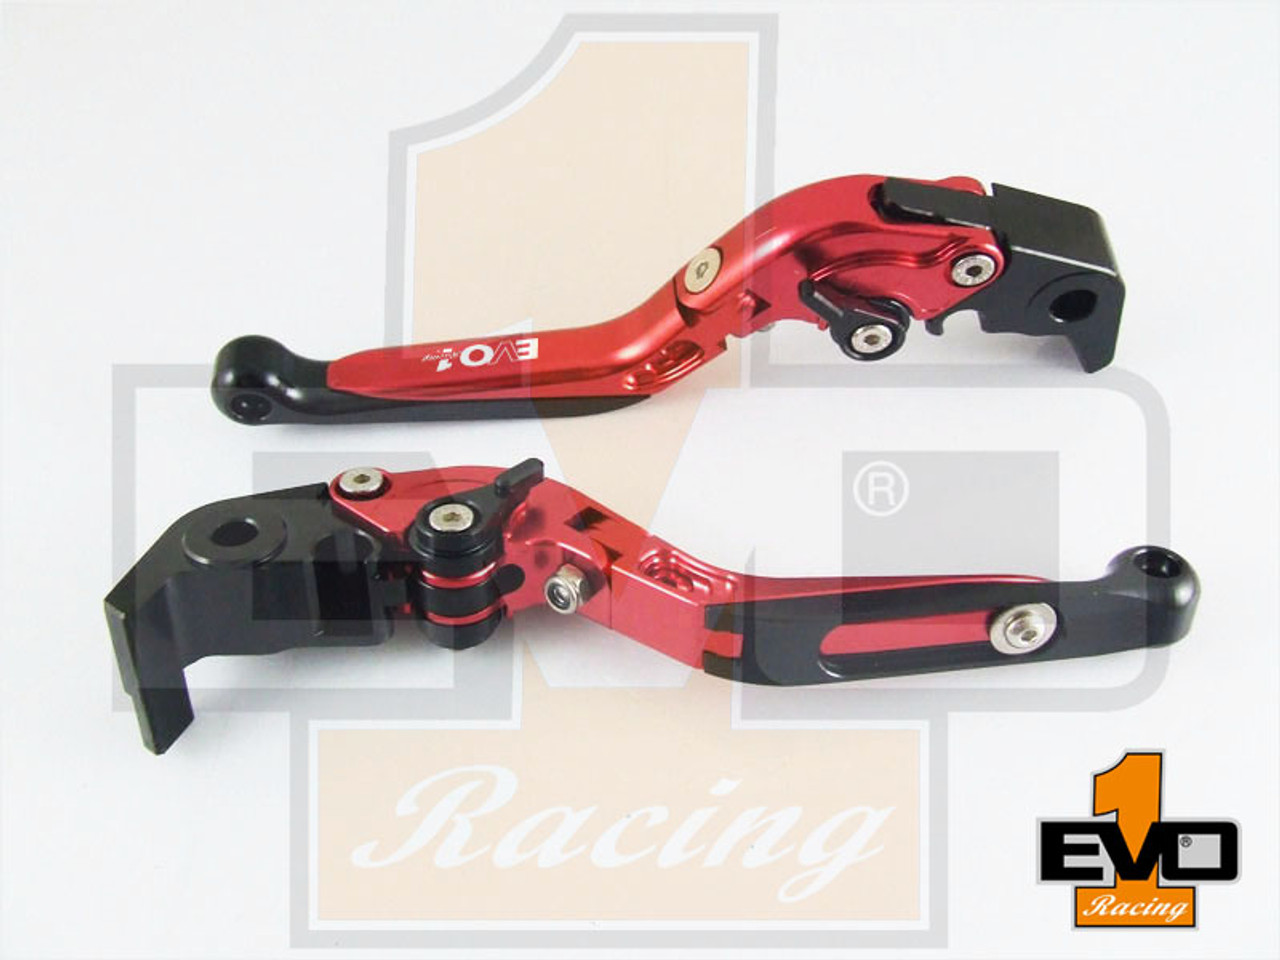 Yamaha MT-07 Brake & Clutch Fold & Extend Levers - Red